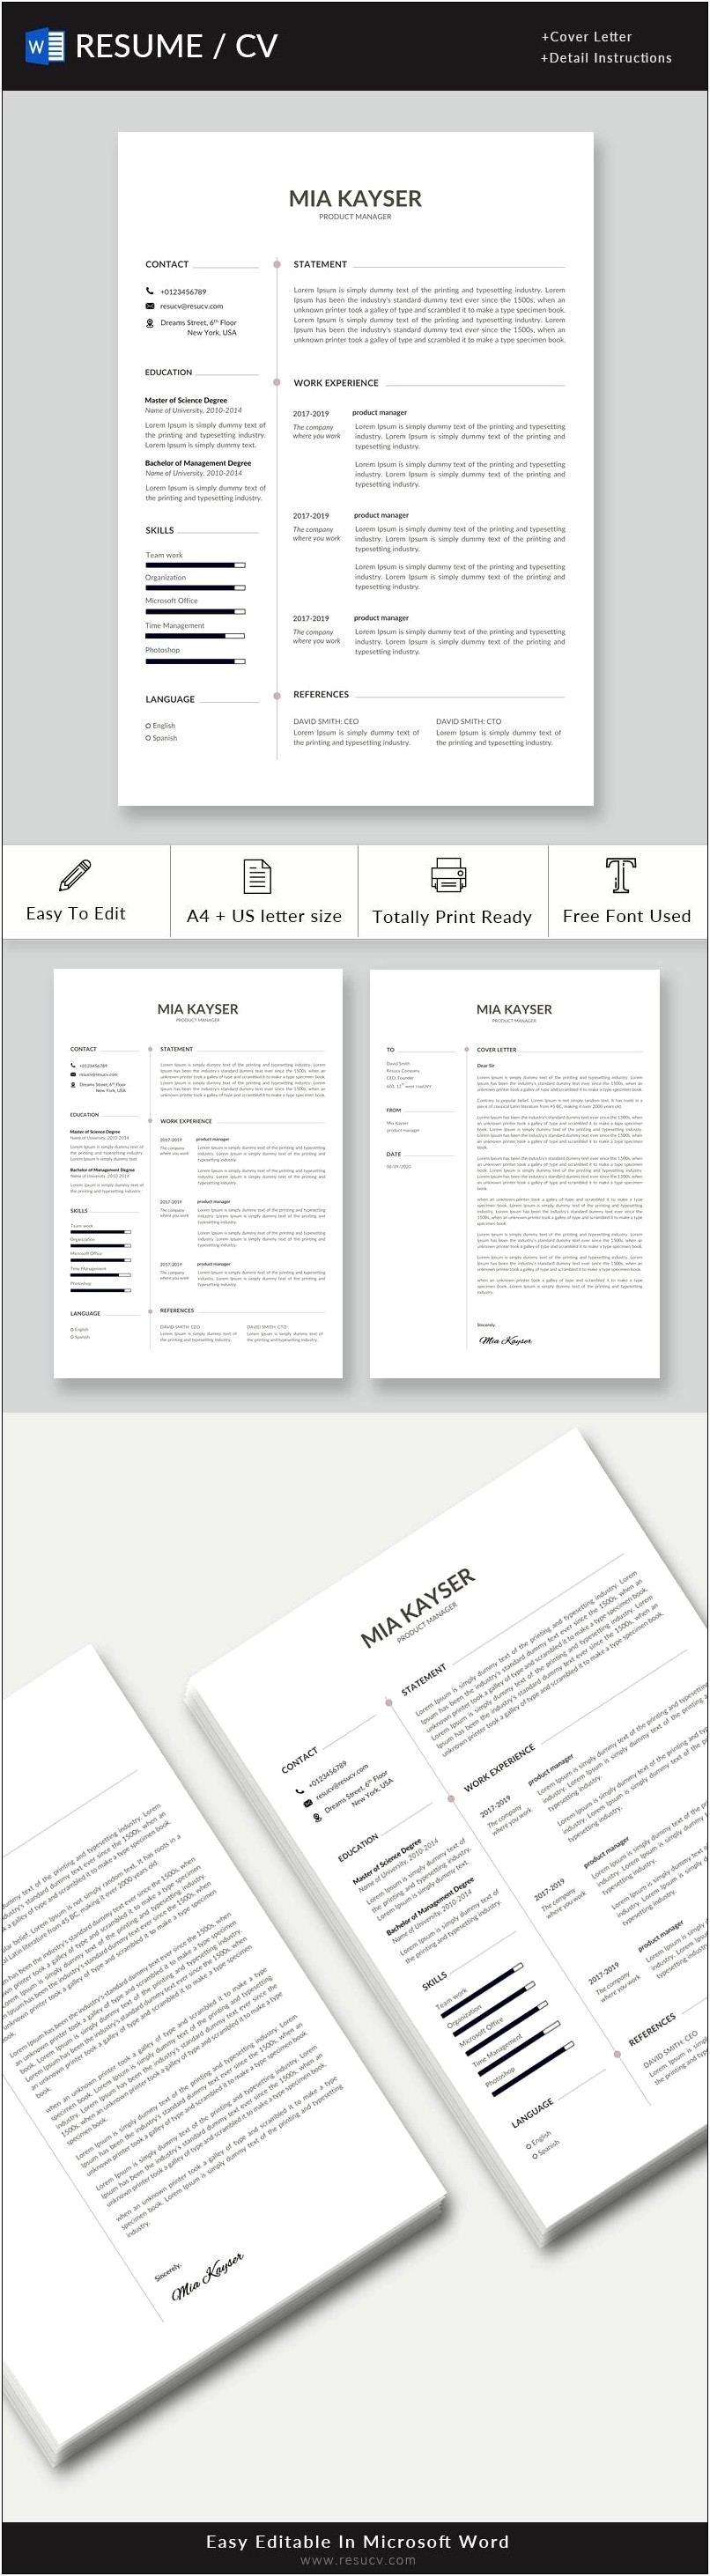 Product Manager Resume Format Filetype Docx